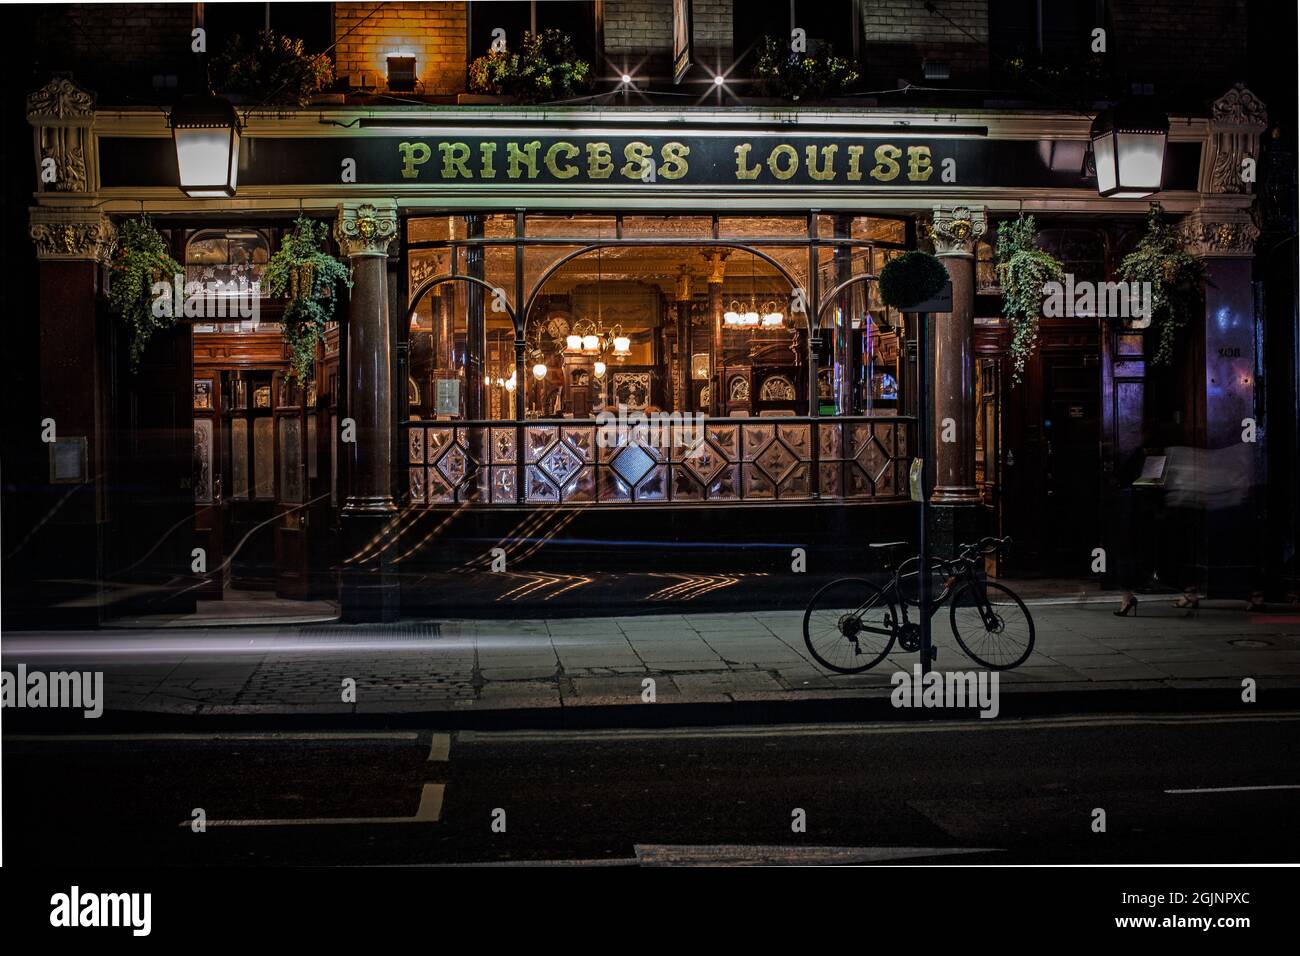 Exterior view of the The Princess Luise pub in London , United Kingdom Stock Photo